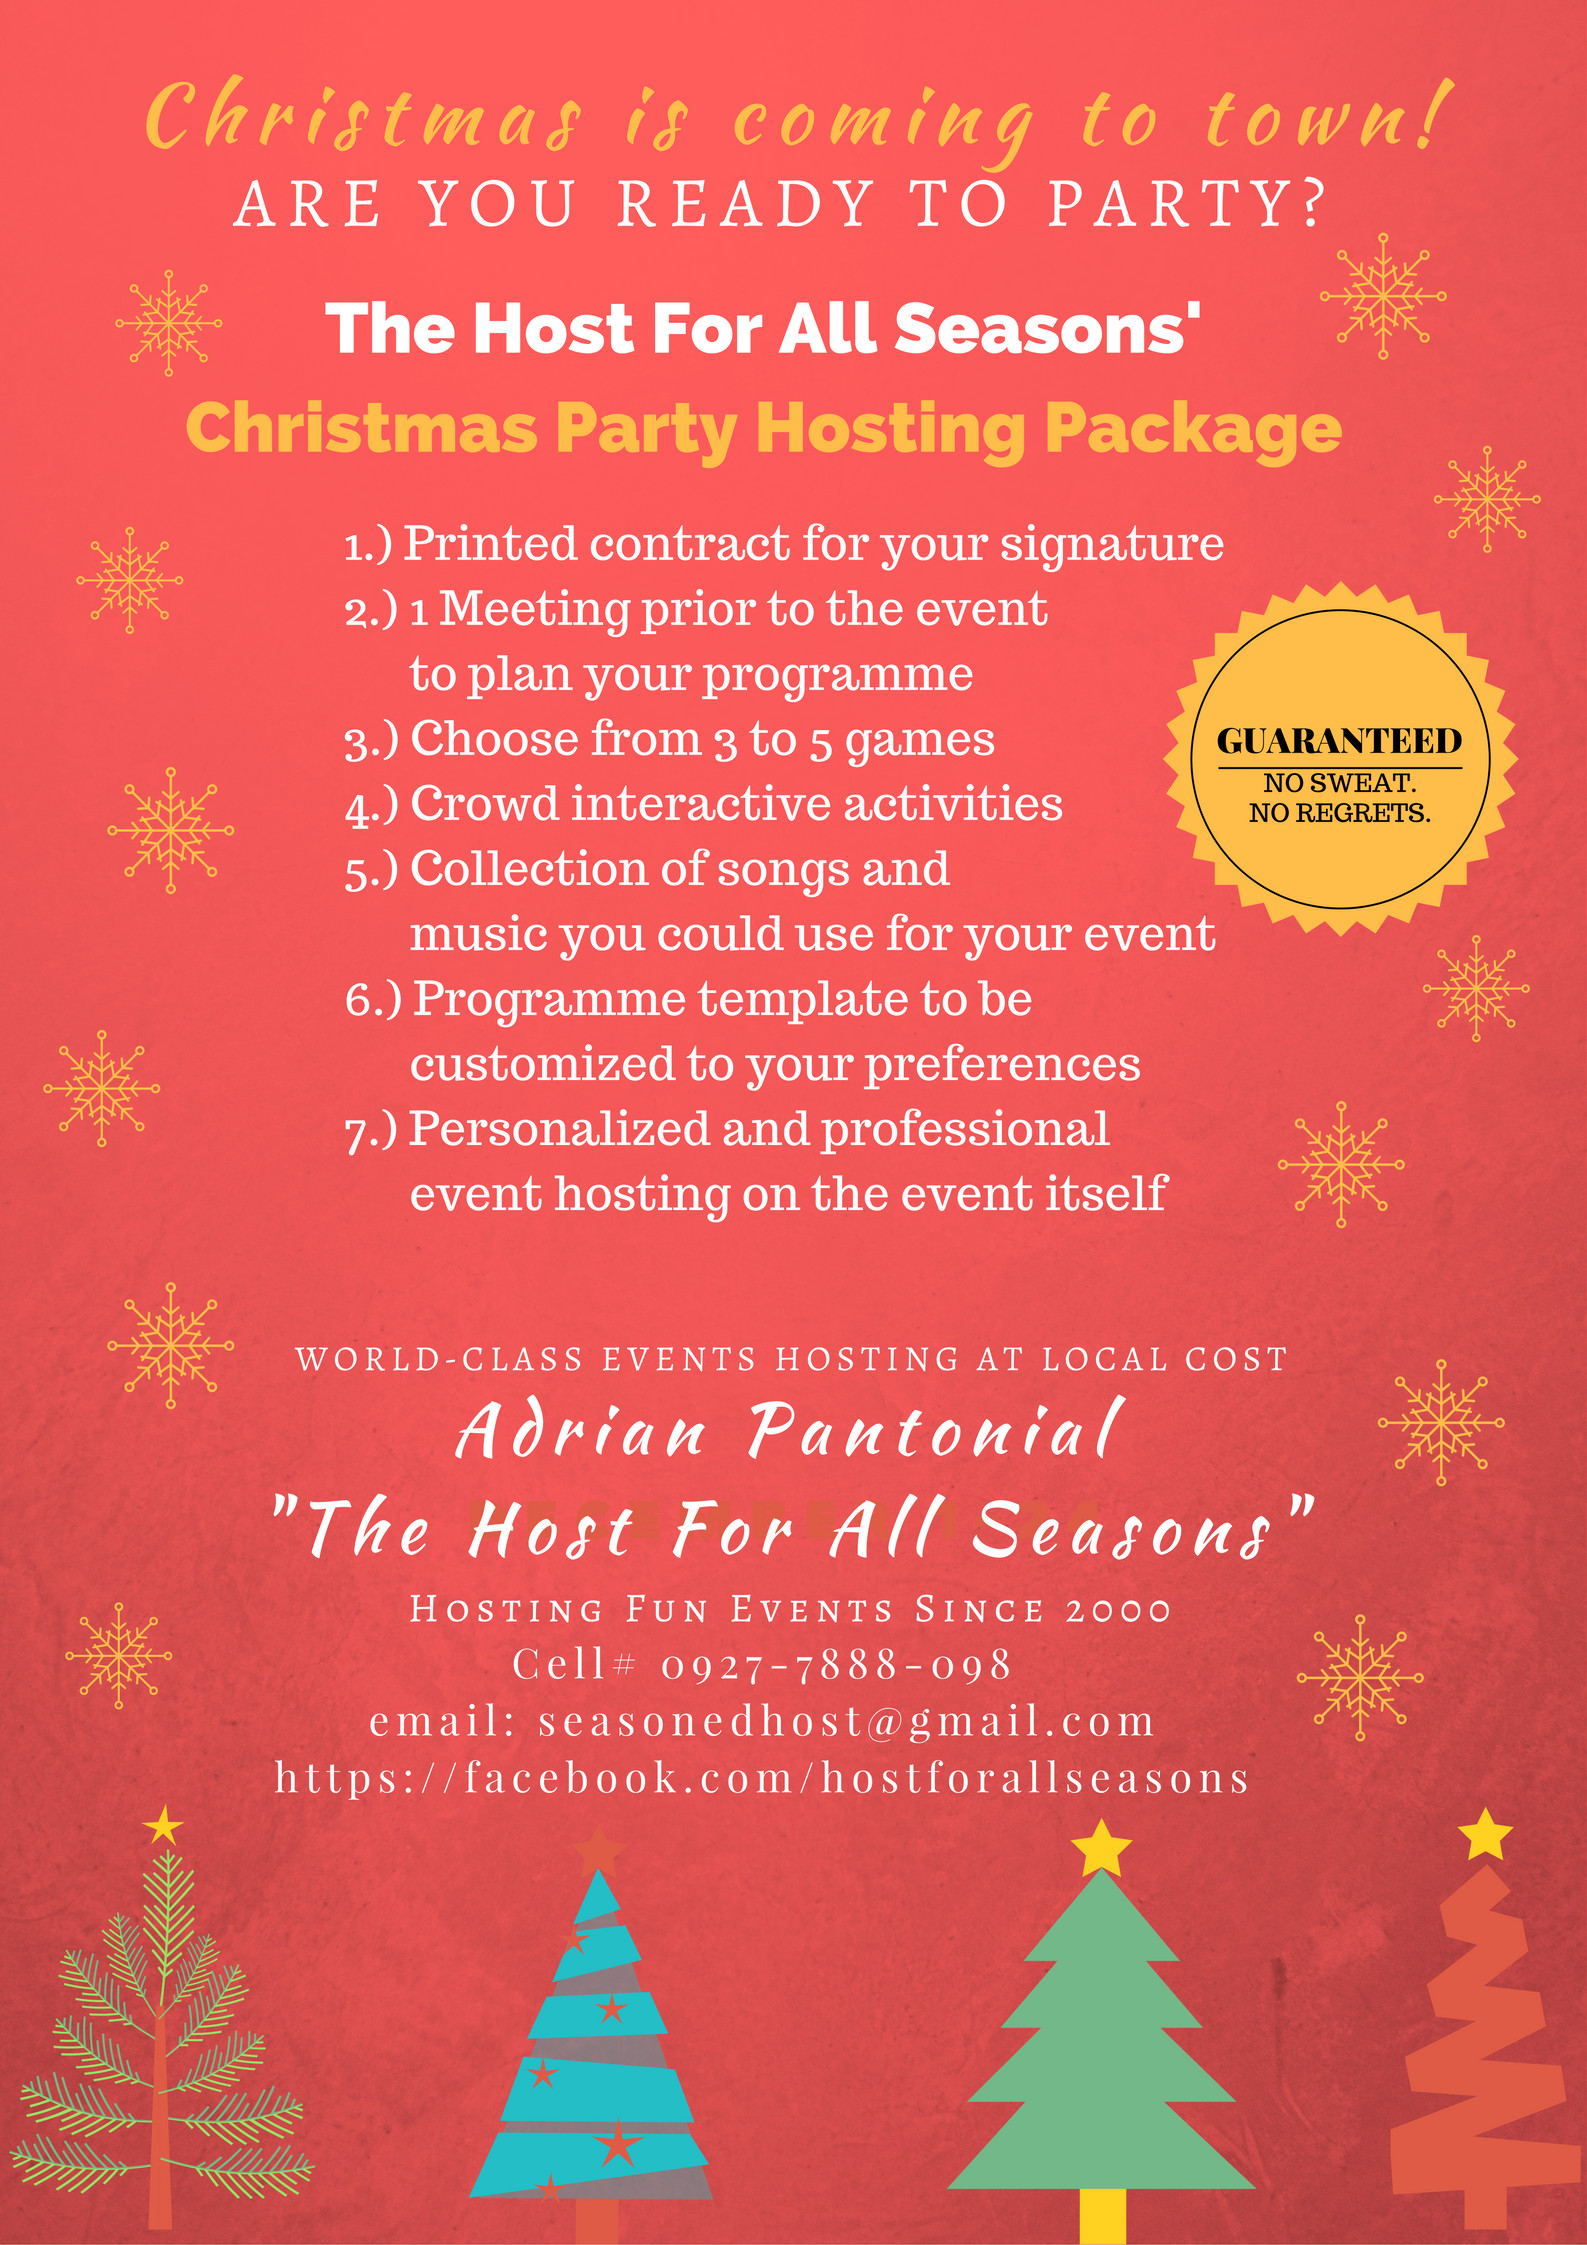 Hosting Christmas Party Ideas
 the host for all seasons christmas party hosting package